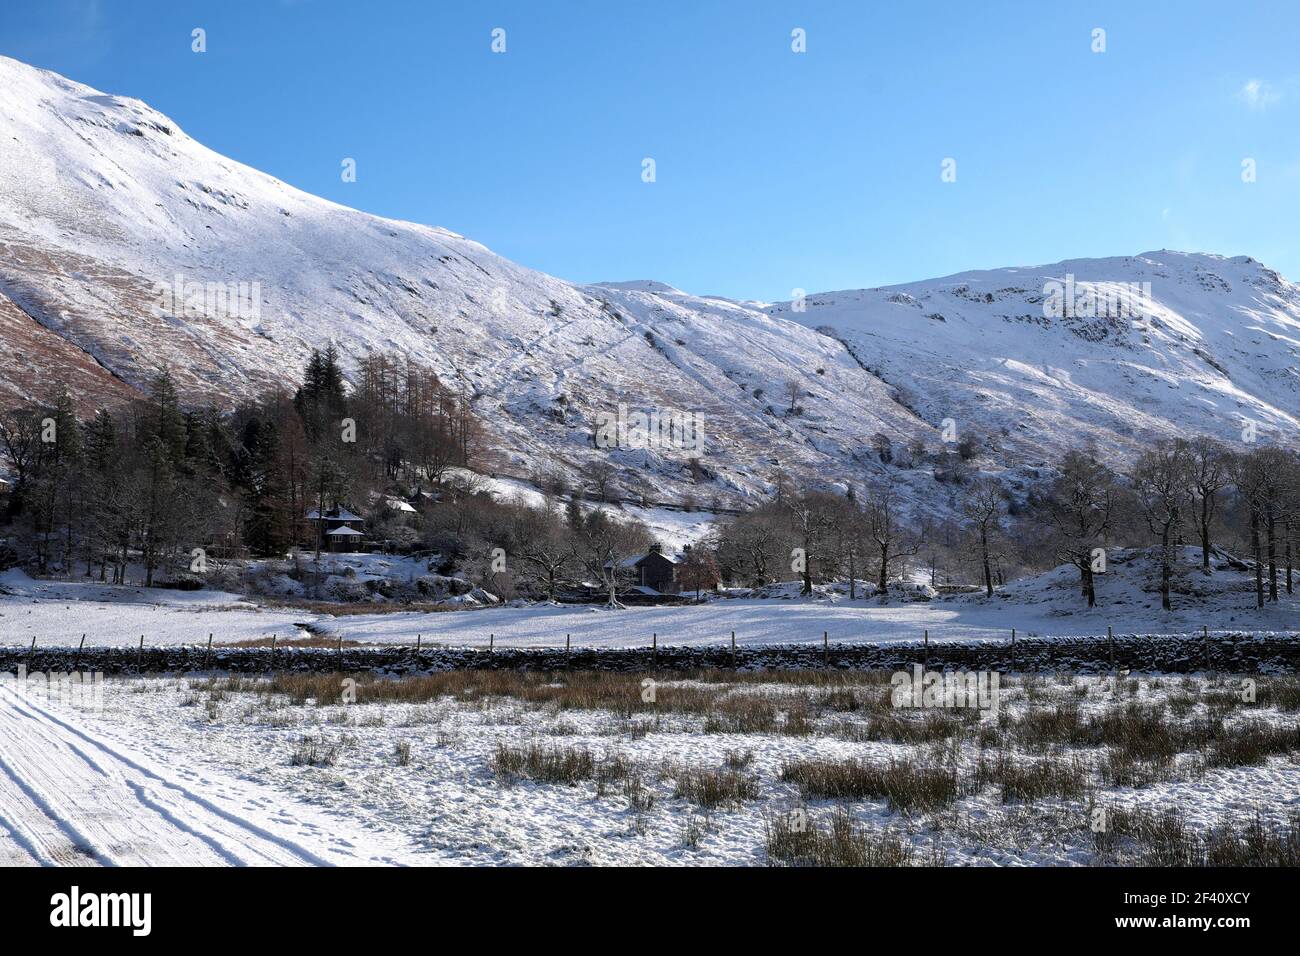 Snow covered mountains, Patterdale, Lake District, Cumbria, England, UK Stock Photo